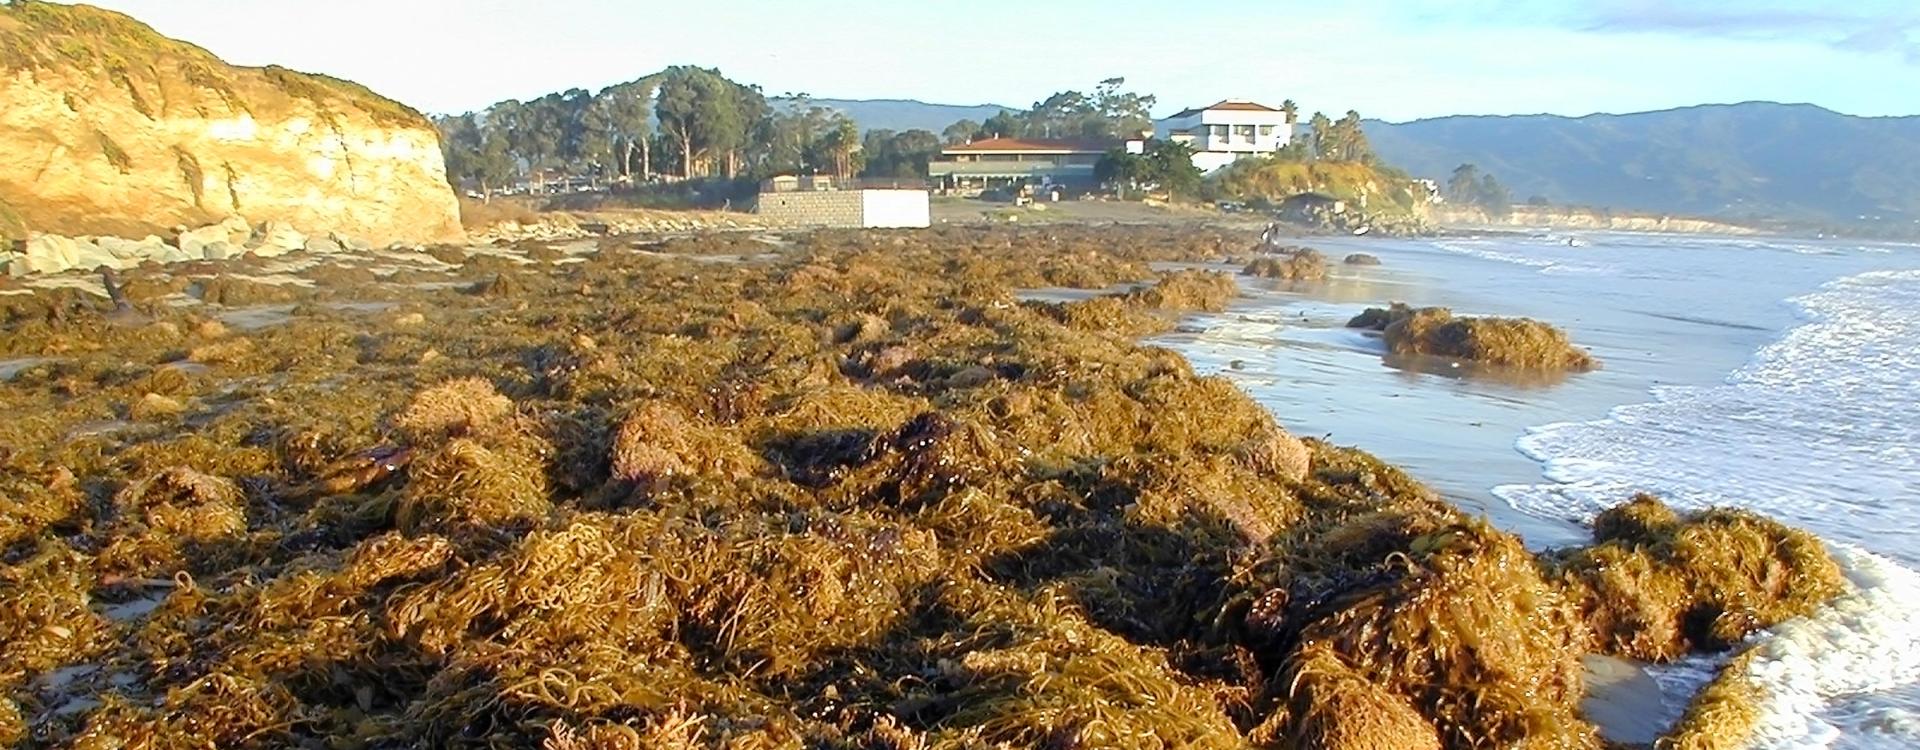 Kelp torn from kelp forests during storms can pile up on Campus Pt beach